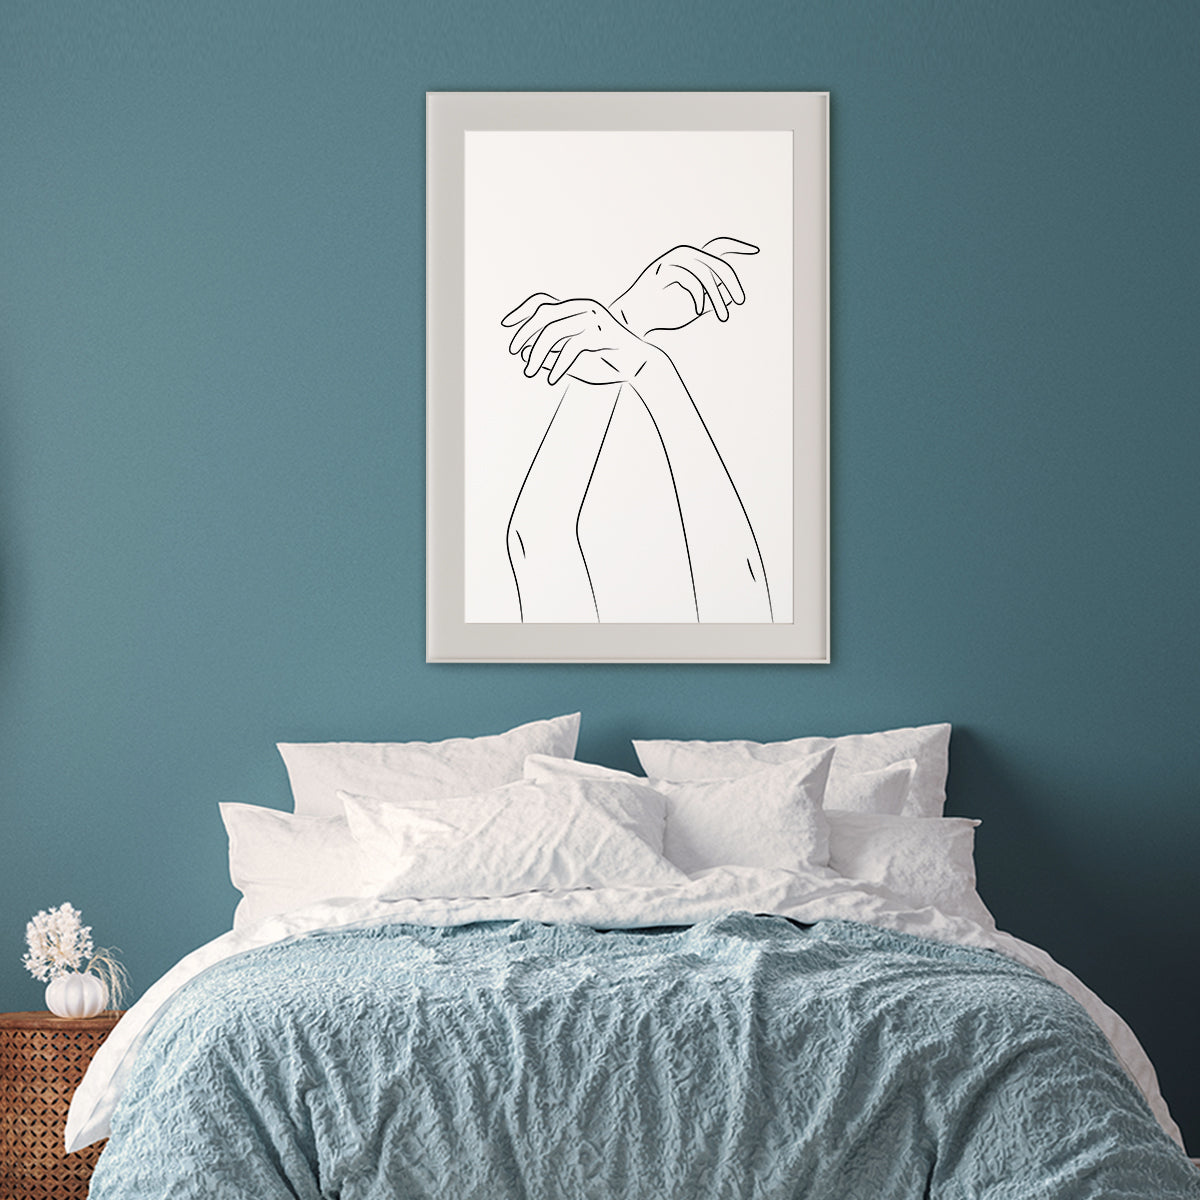 Trendy Minimalist Hands Line Art Posters Art Decor for Home-Vertical Posters NOT FRAMED-CetArt-8″x10″ inches-CetArt